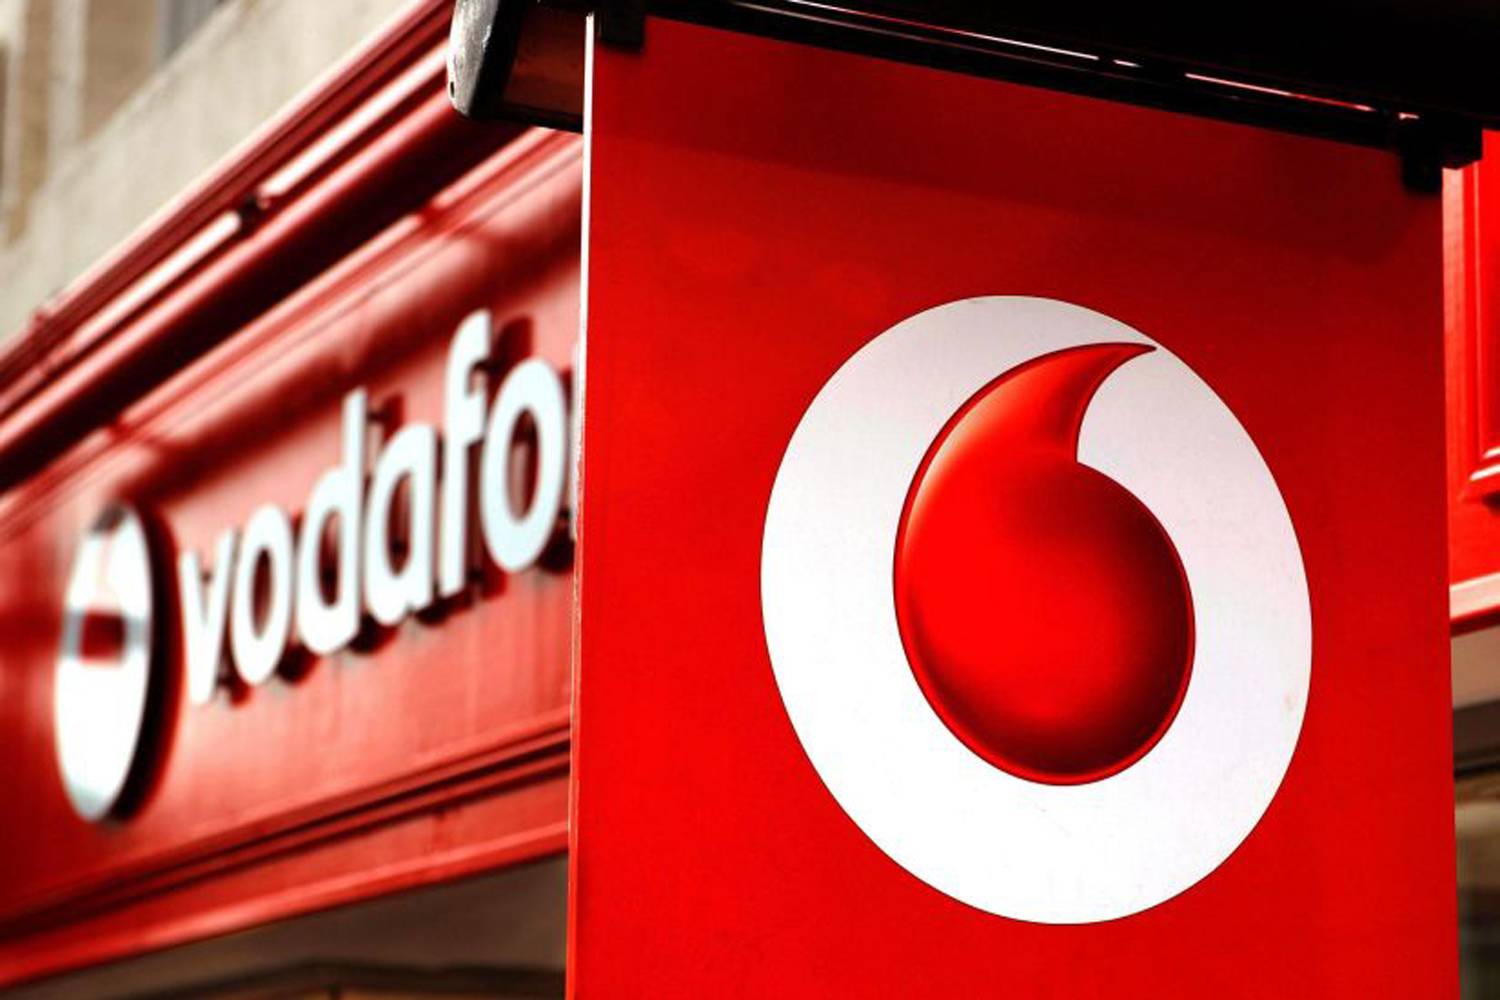 "I wouldn't wish this on anybody" - Vodafone HRD explains